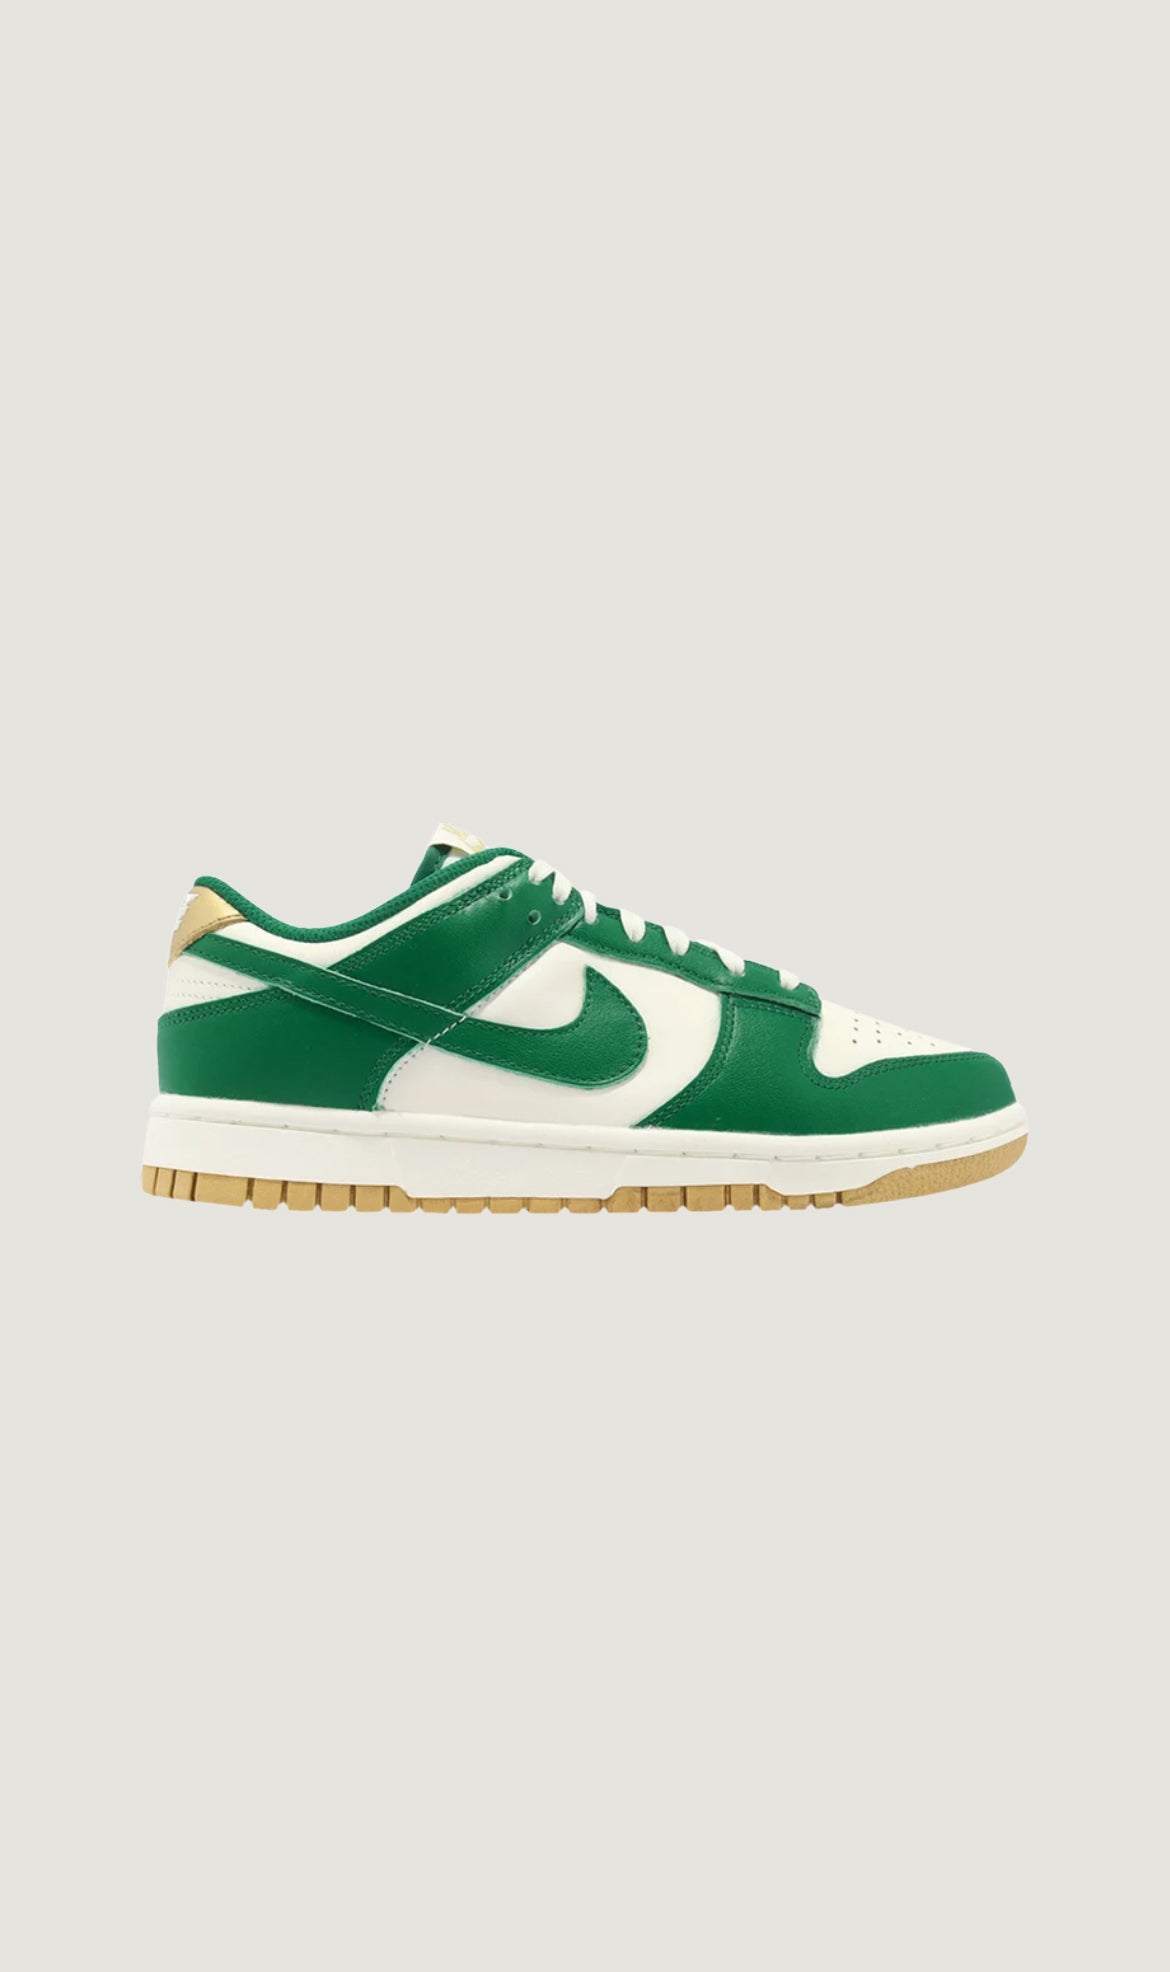 Load image into Gallery viewer, WMNS DUNK LOW - MALACHITE METALLIC GOLD
